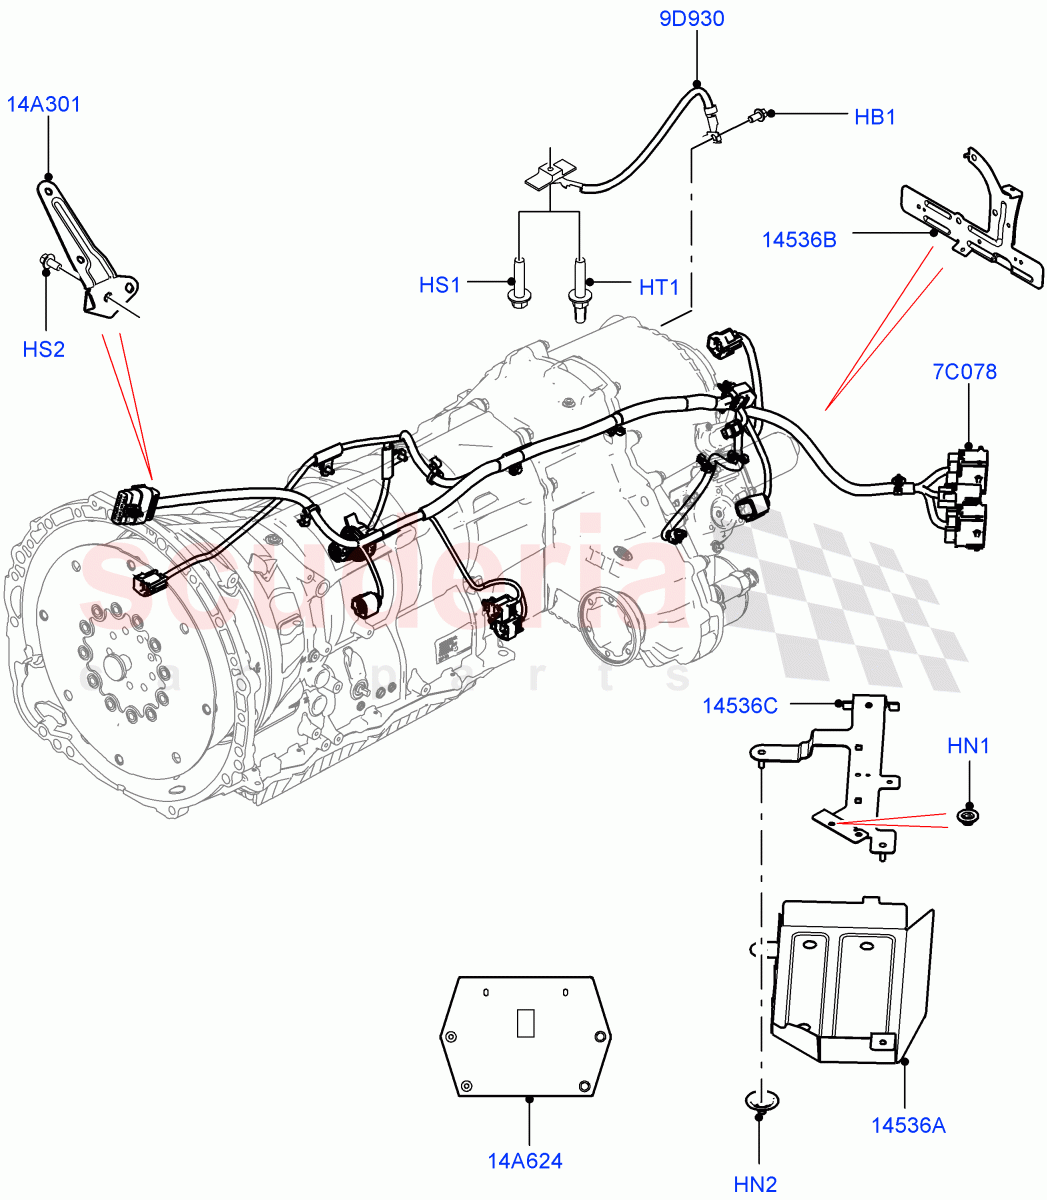 Electrical Wiring - Engine And Dash(Transmission)((V)TOFA999999) of Land Rover Land Rover Range Rover Sport (2014+) [2.0 Turbo Petrol GTDI]